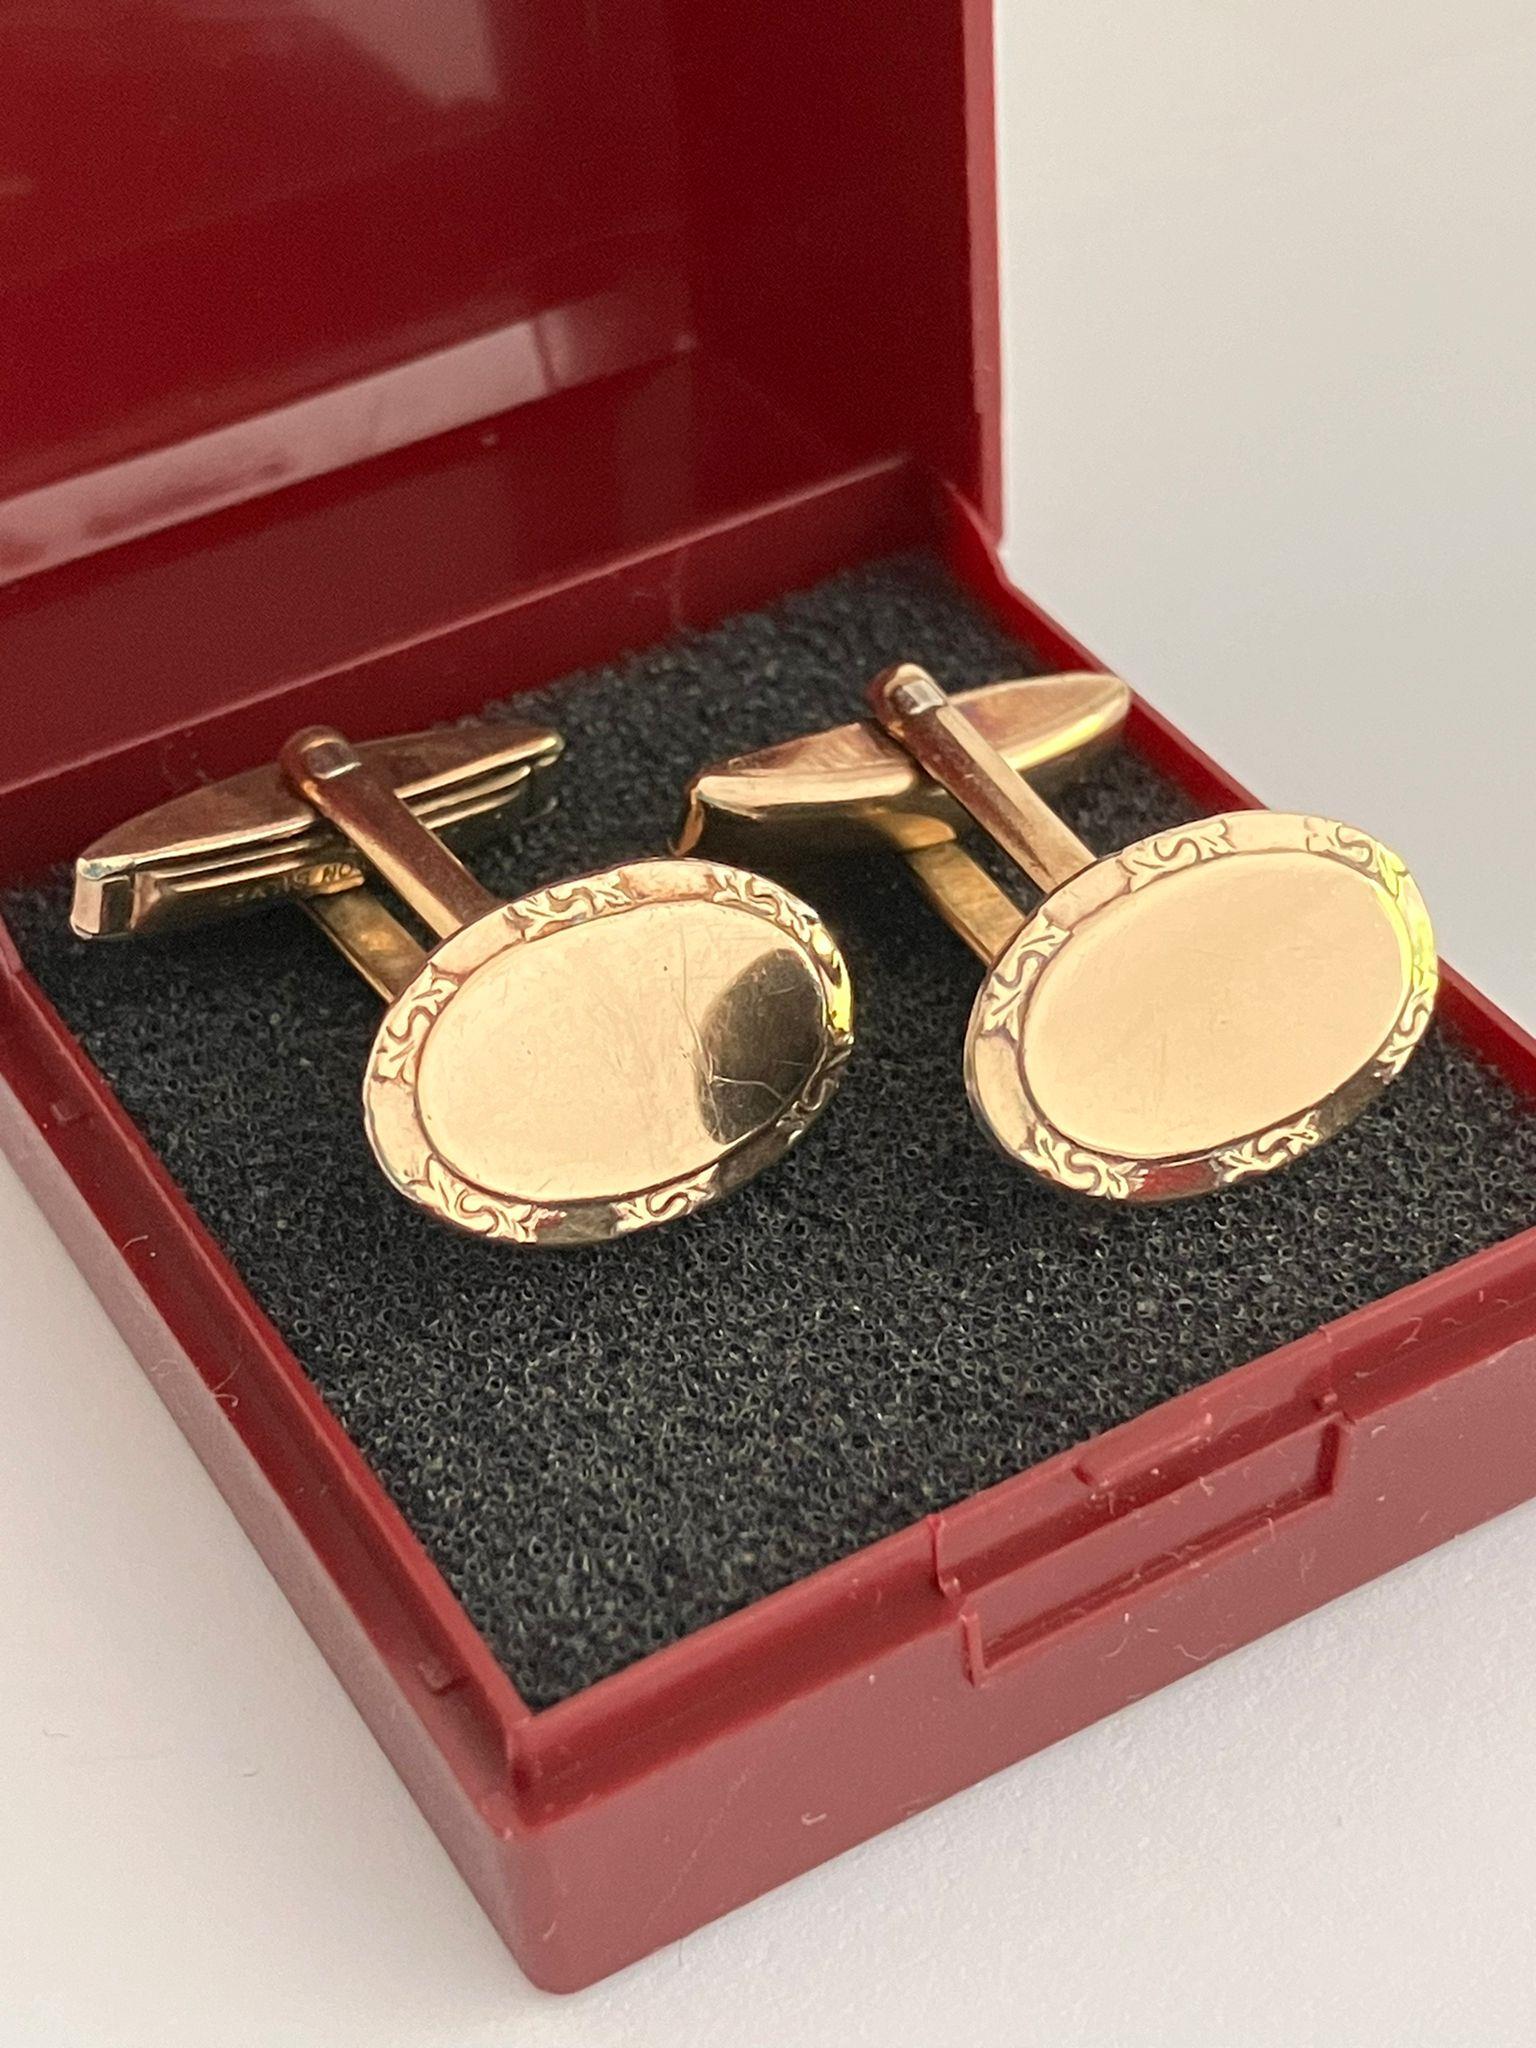 Vintage 9 carat GOLD and SILVER CUFFLINKS.Swivel fitting. No engraving or inscriptions. Please see